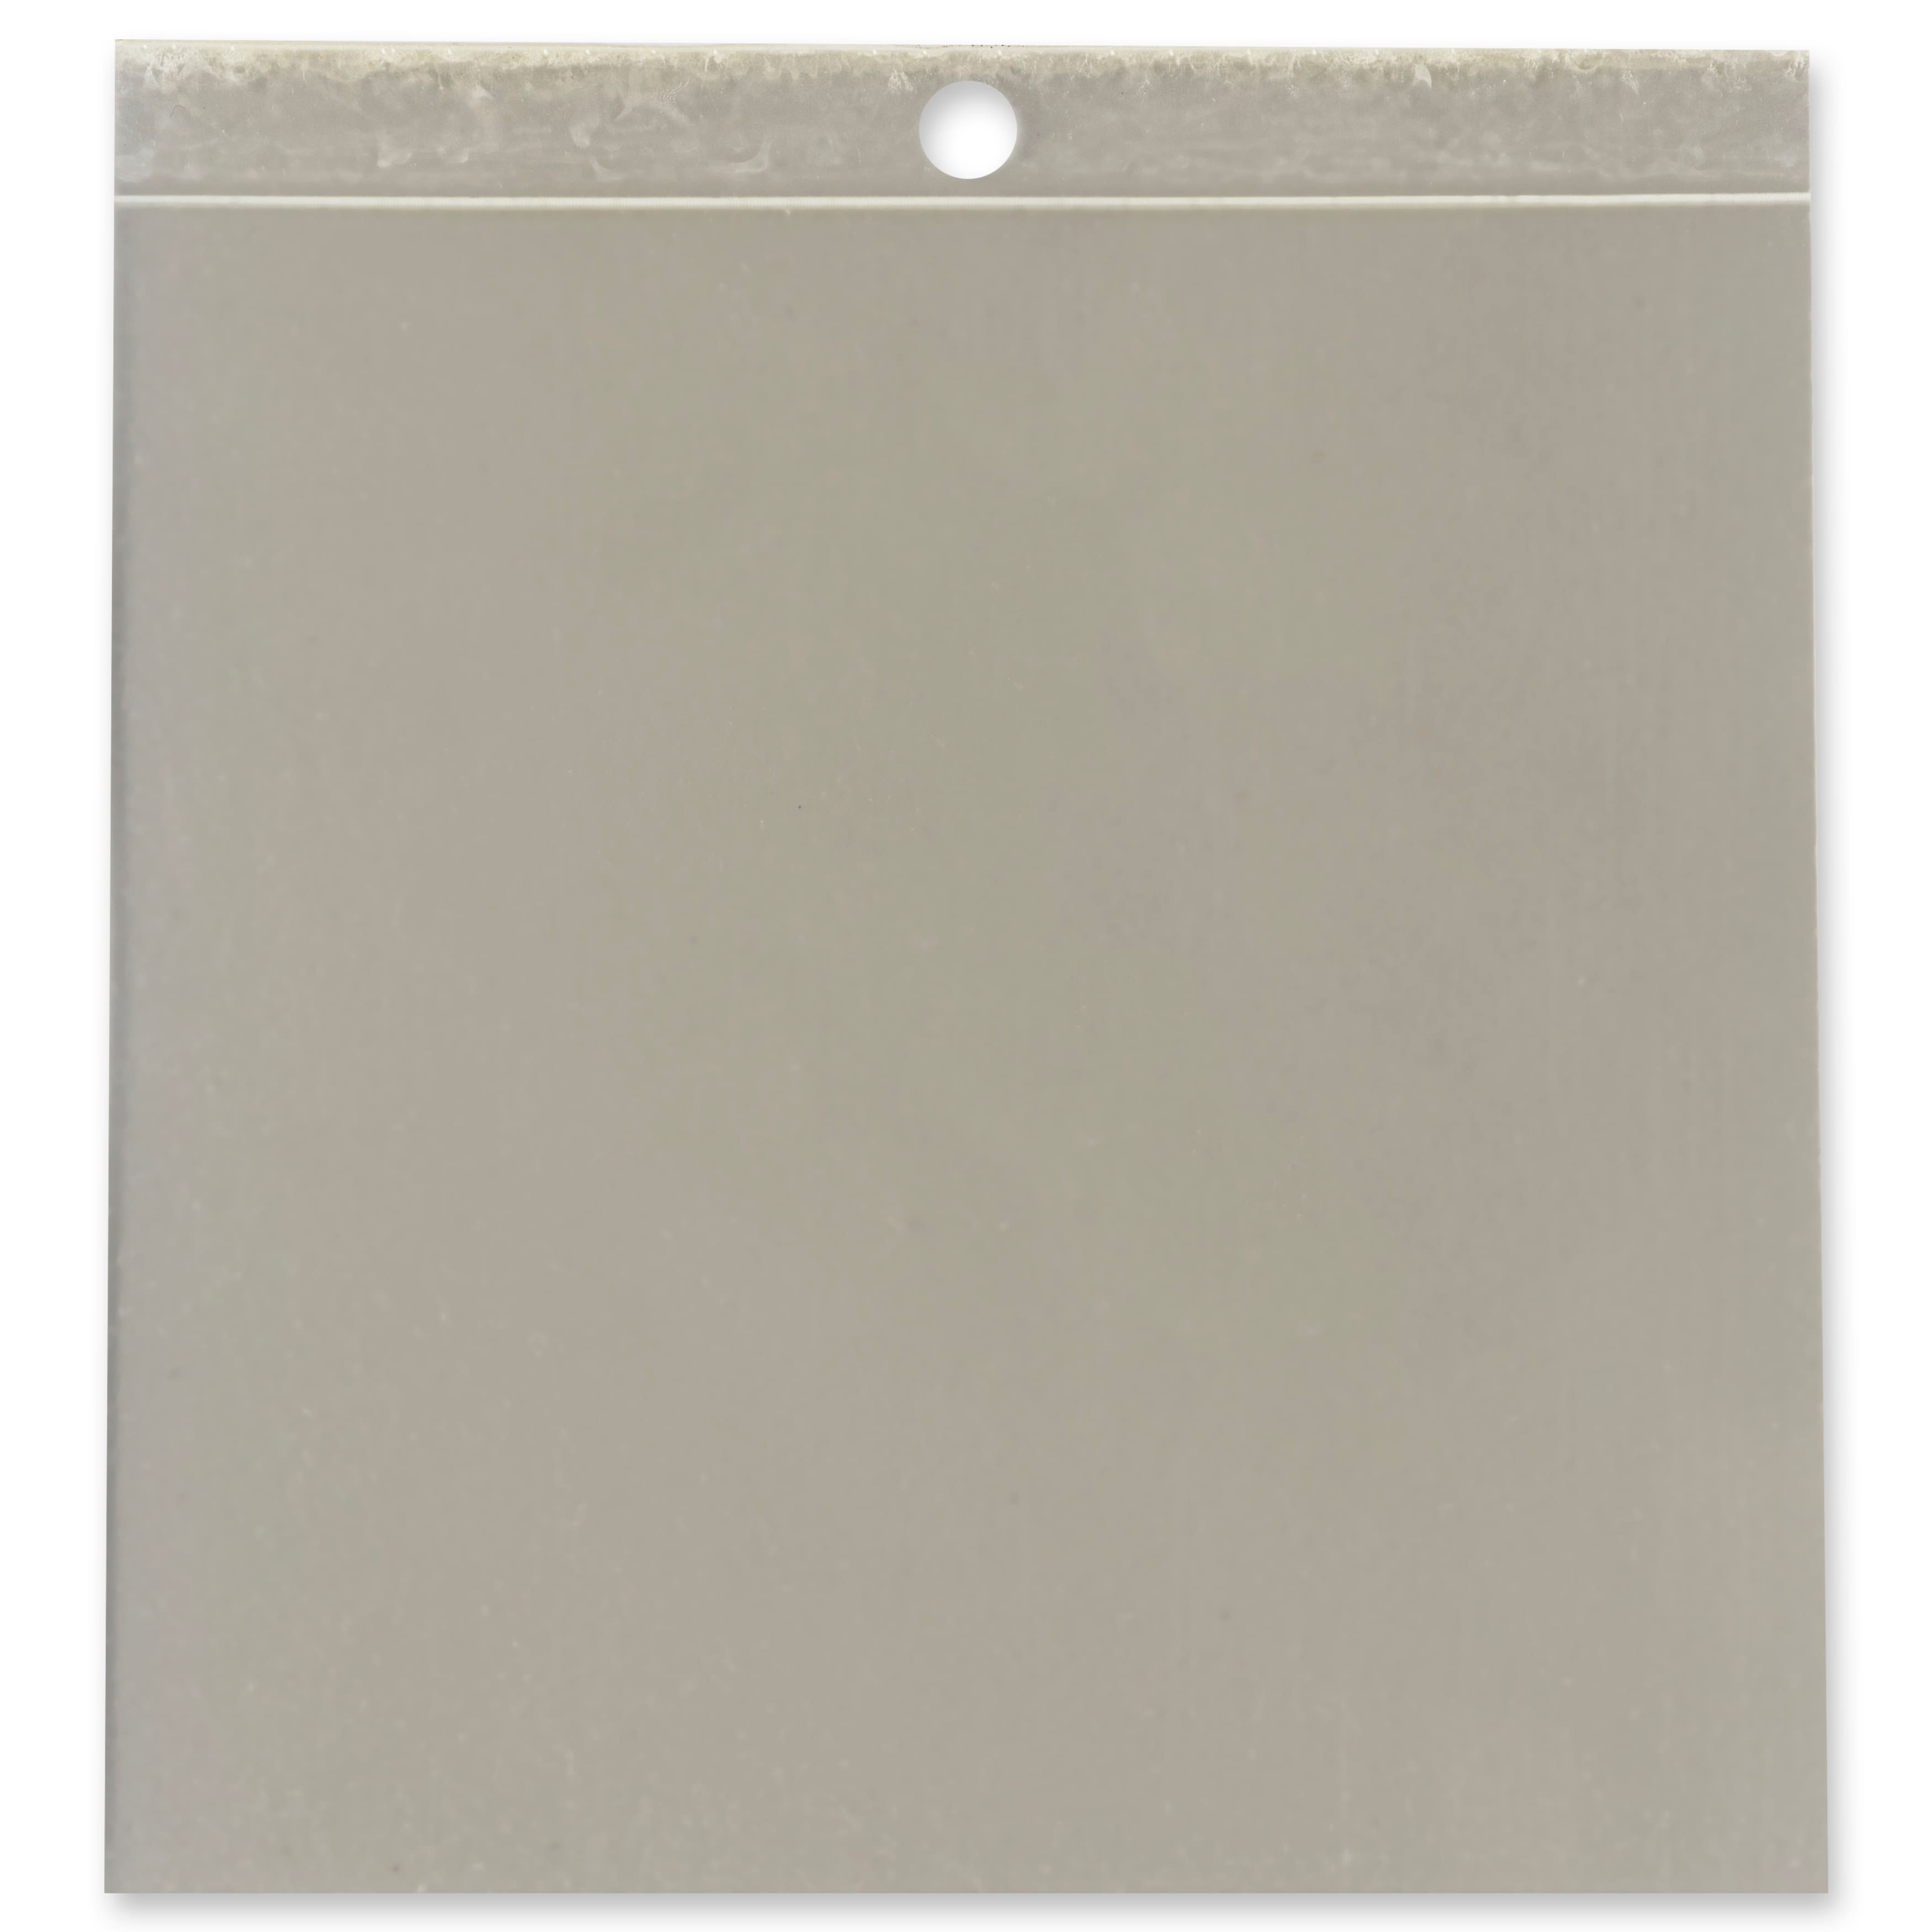 Primary Acetate Sheets, 50ct. by Creatology™